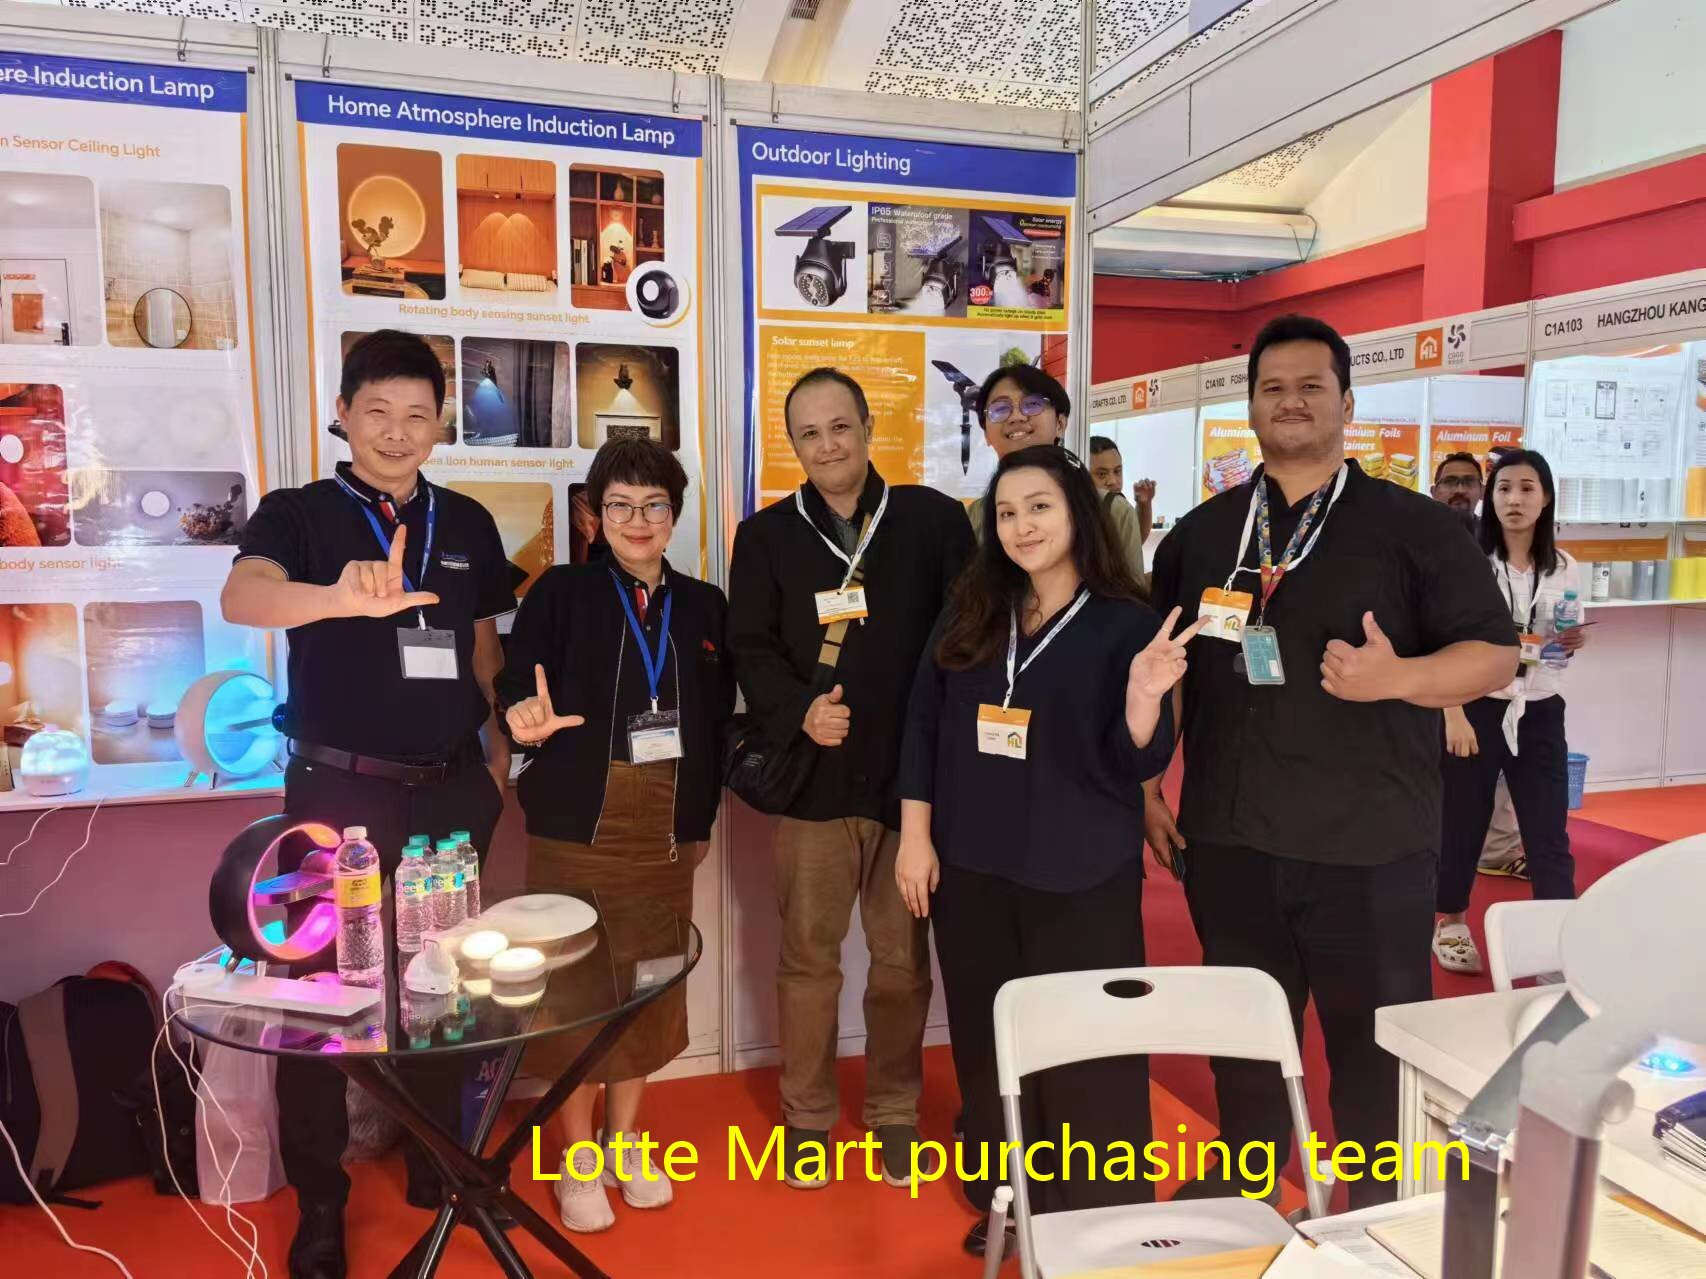 Ningbo Deamak Shines at China (Indonesia) Expo, Attracts Industry Buyers